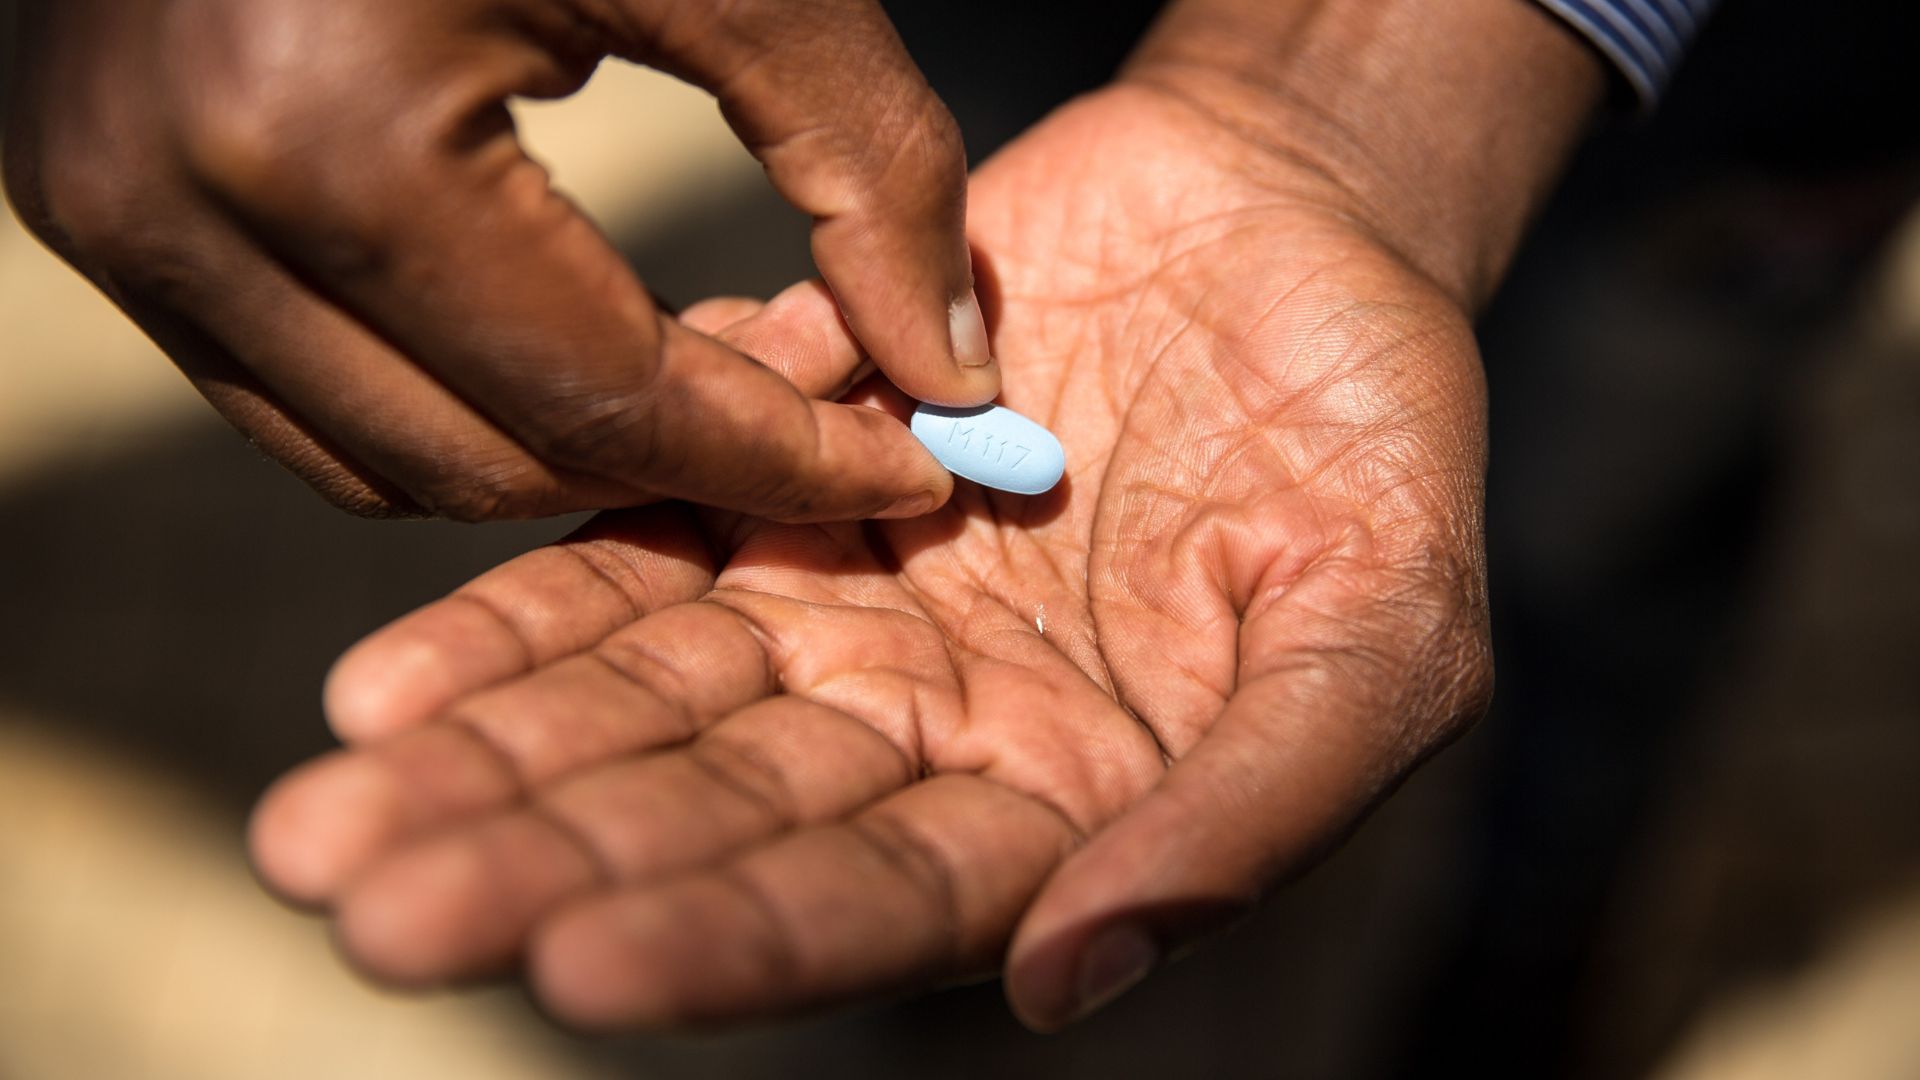 close up of a man's open hand as he places a small, light blue pill onto his palm